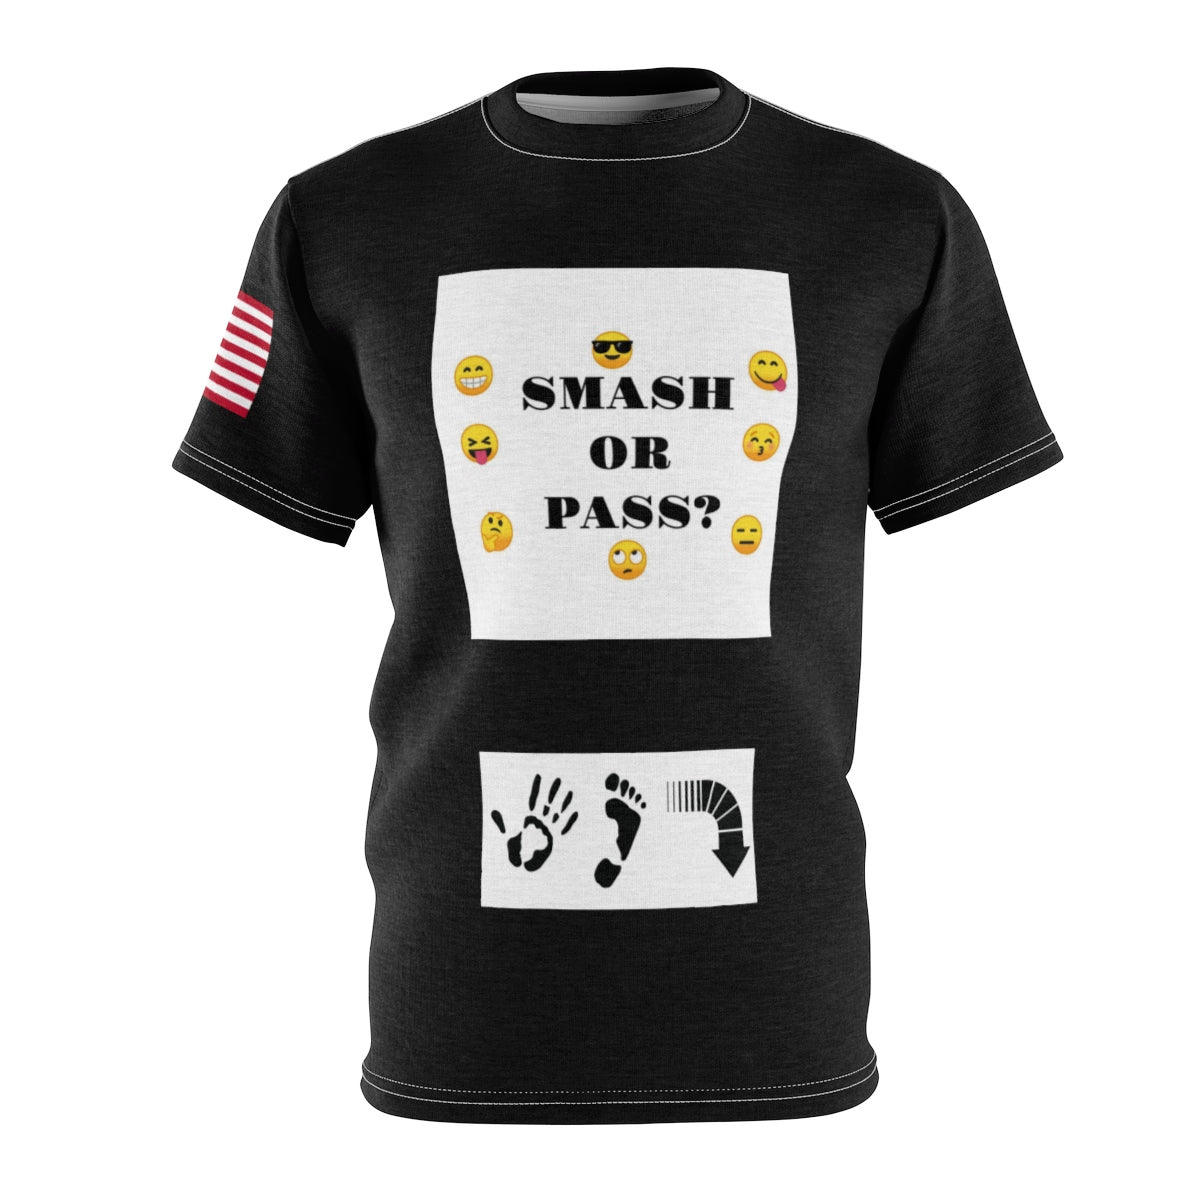 Five Toes Down Smash/Pass Unisex Cut & Sew Tee